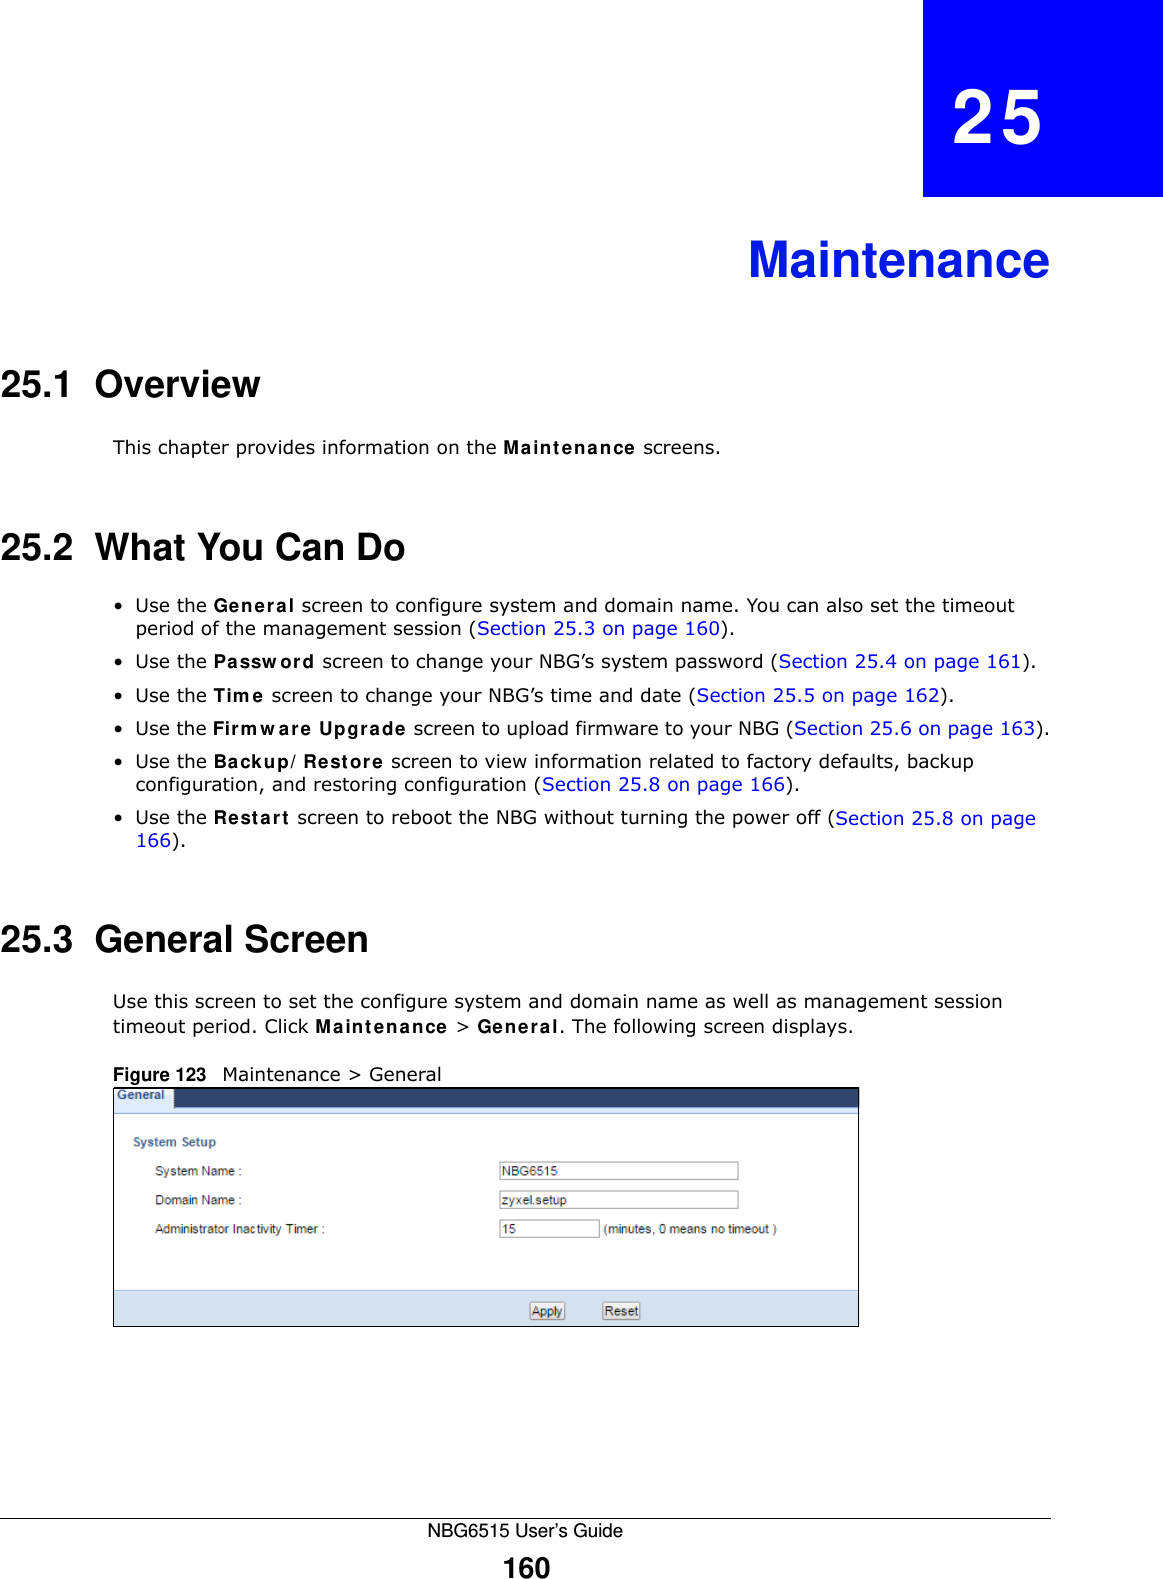 NBG6515 User’s Guide160CHAPTER   25Maintenance25.1  OverviewThis chapter provides information on the Maintenance screens. 25.2  What You Can Do•Use the General screen to configure system and domain name. You can also set the timeout period of the management session (Section 25.3 on page 160). •Use the Password screen to change your NBG’s system password (Section 25.4 on page 161).•Use the Time screen to change your NBG’s time and date (Section 25.5 on page 162).•Use the Firmware Upgrade screen to upload firmware to your NBG (Section 25.6 on page 163).•Use the Backup/Restore screen to view information related to factory defaults, backup configuration, and restoring configuration (Section 25.8 on page 166).•Use the Restart screen to reboot the NBG without turning the power off (Section 25.8 on page 166).25.3  General Screen Use this screen to set the configure system and domain name as well as management session timeout period. Click Maintenance &gt; General. The following screen displays.Figure 123   Maintenance &gt; General 